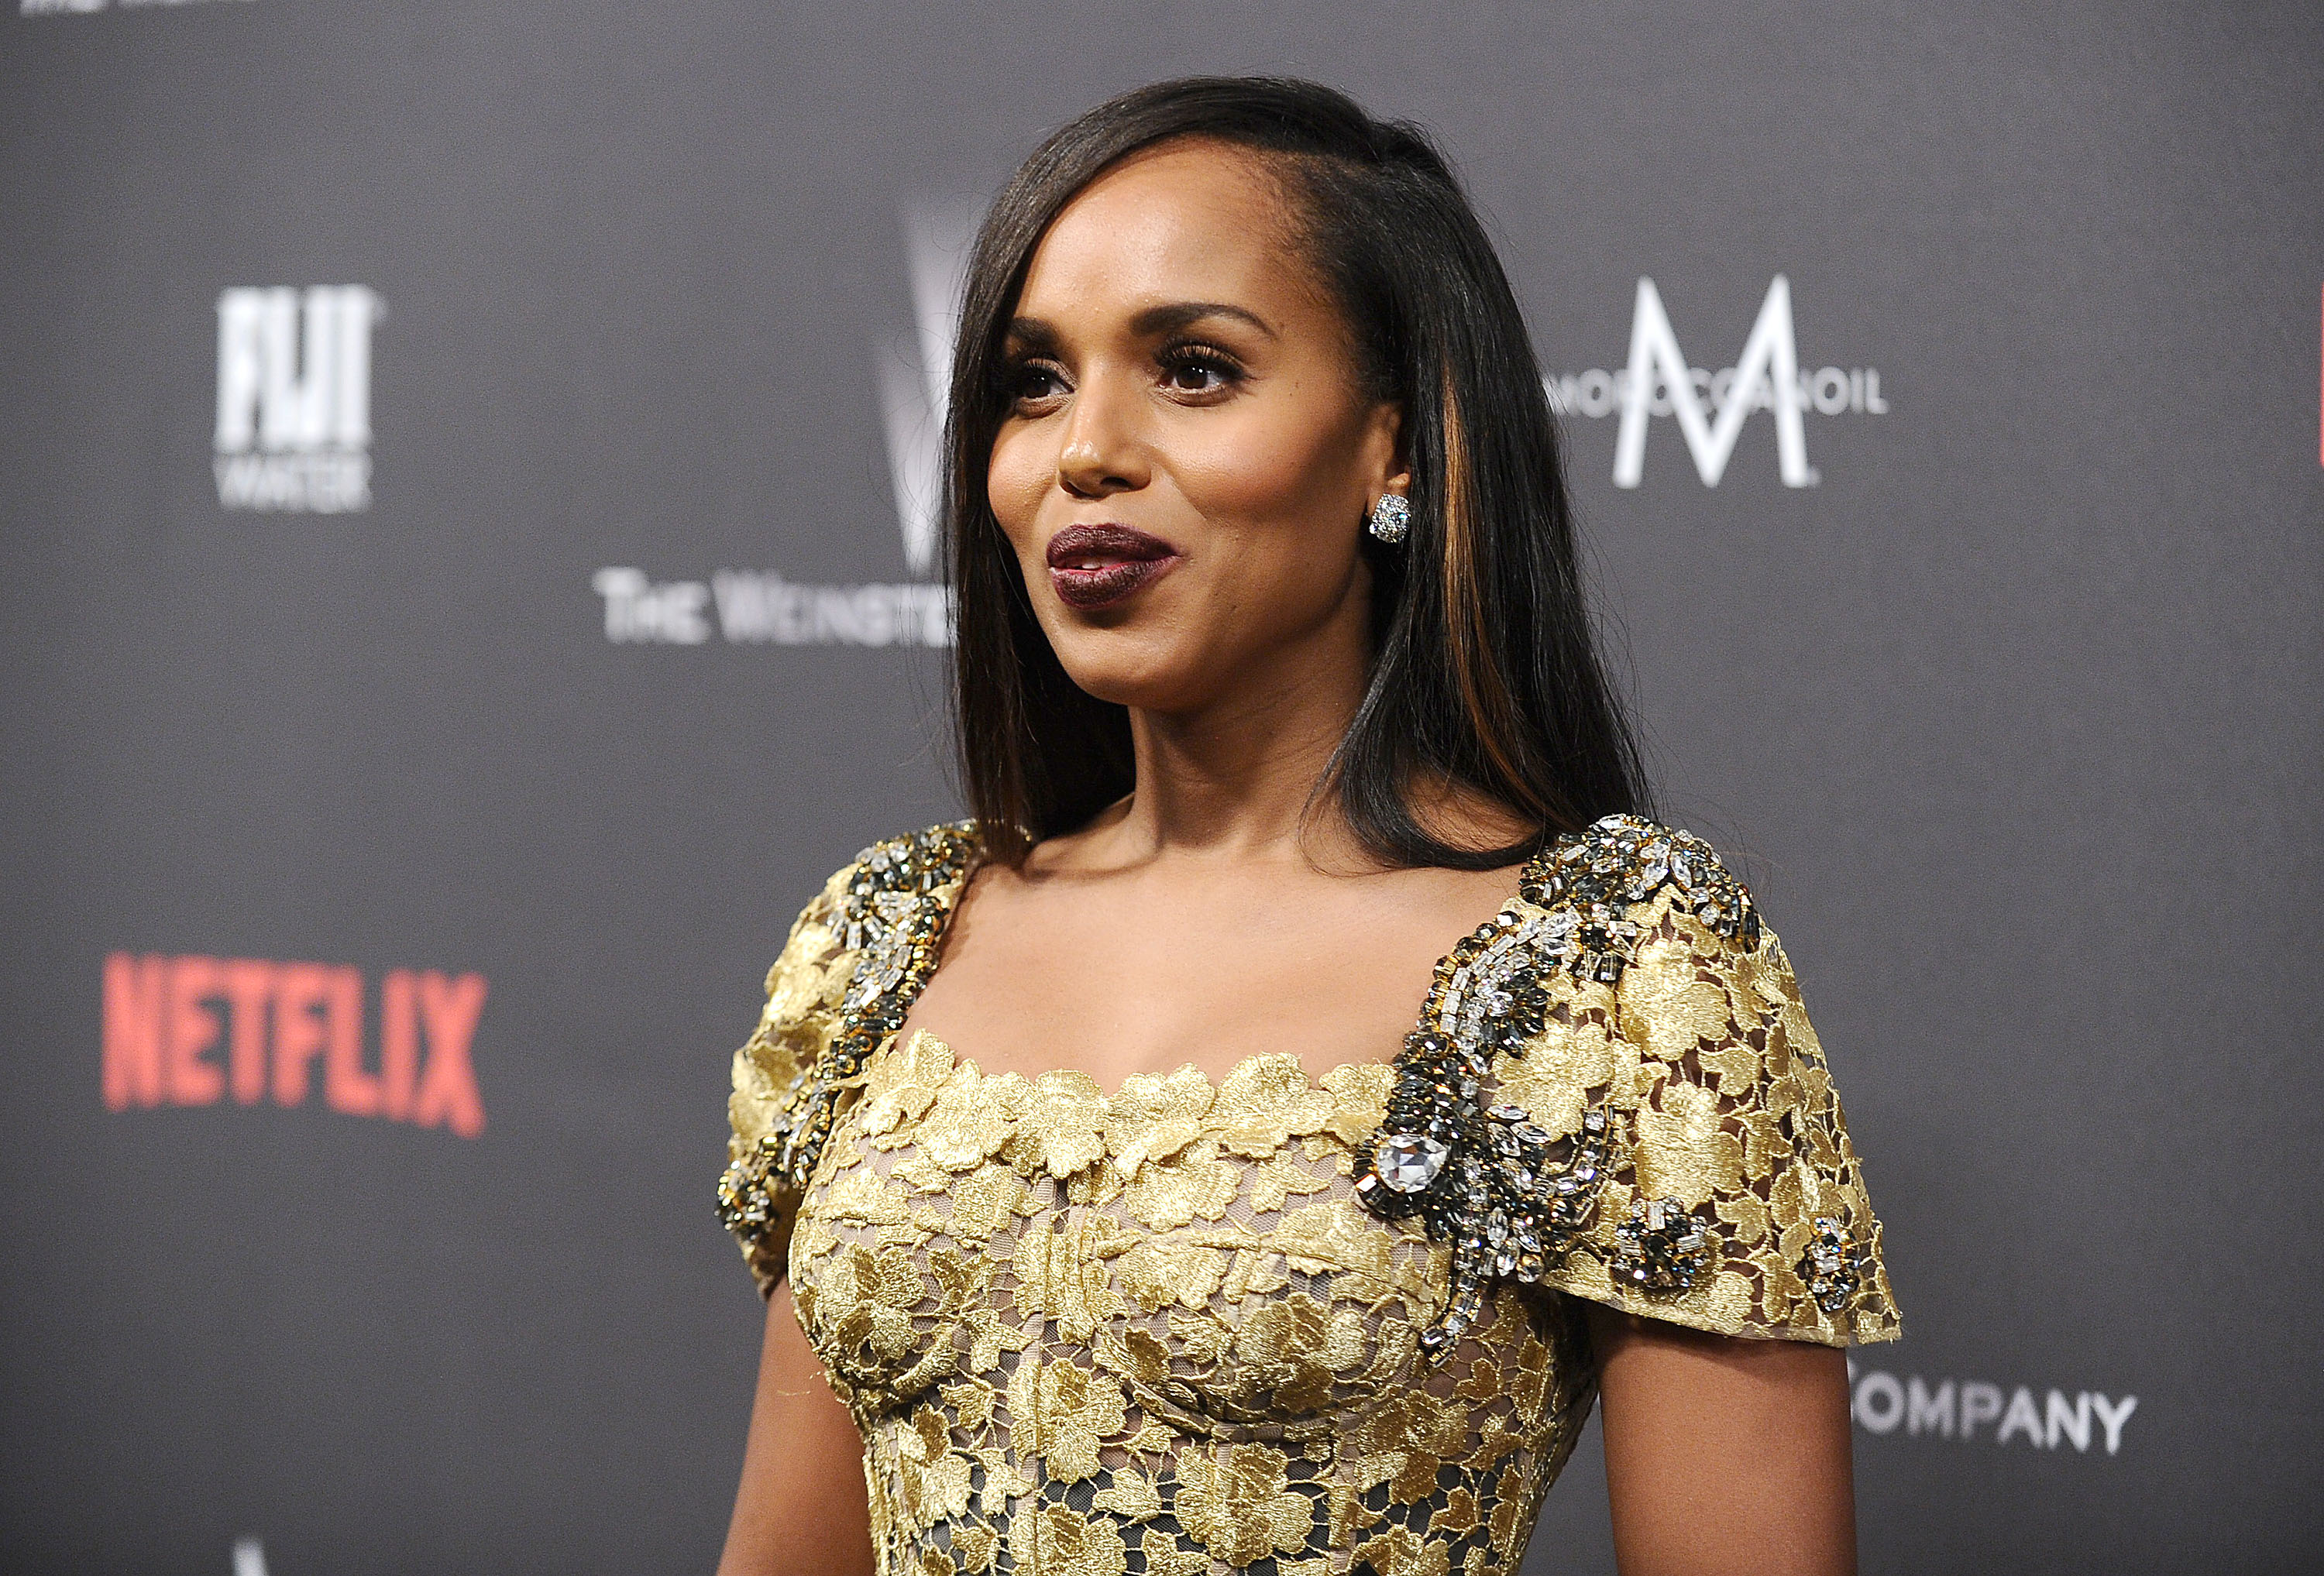 LOS ANGELES, CA - JANUARY 08:  Actress Kerry Washington attends the 2017 Weinstein Company and Netflix Golden Globes after party on January 8, 2017 in Los Angeles, California.  (Photo by Jason LaVeris/FilmMagic) (Jason LaVeris—FilmMagic)